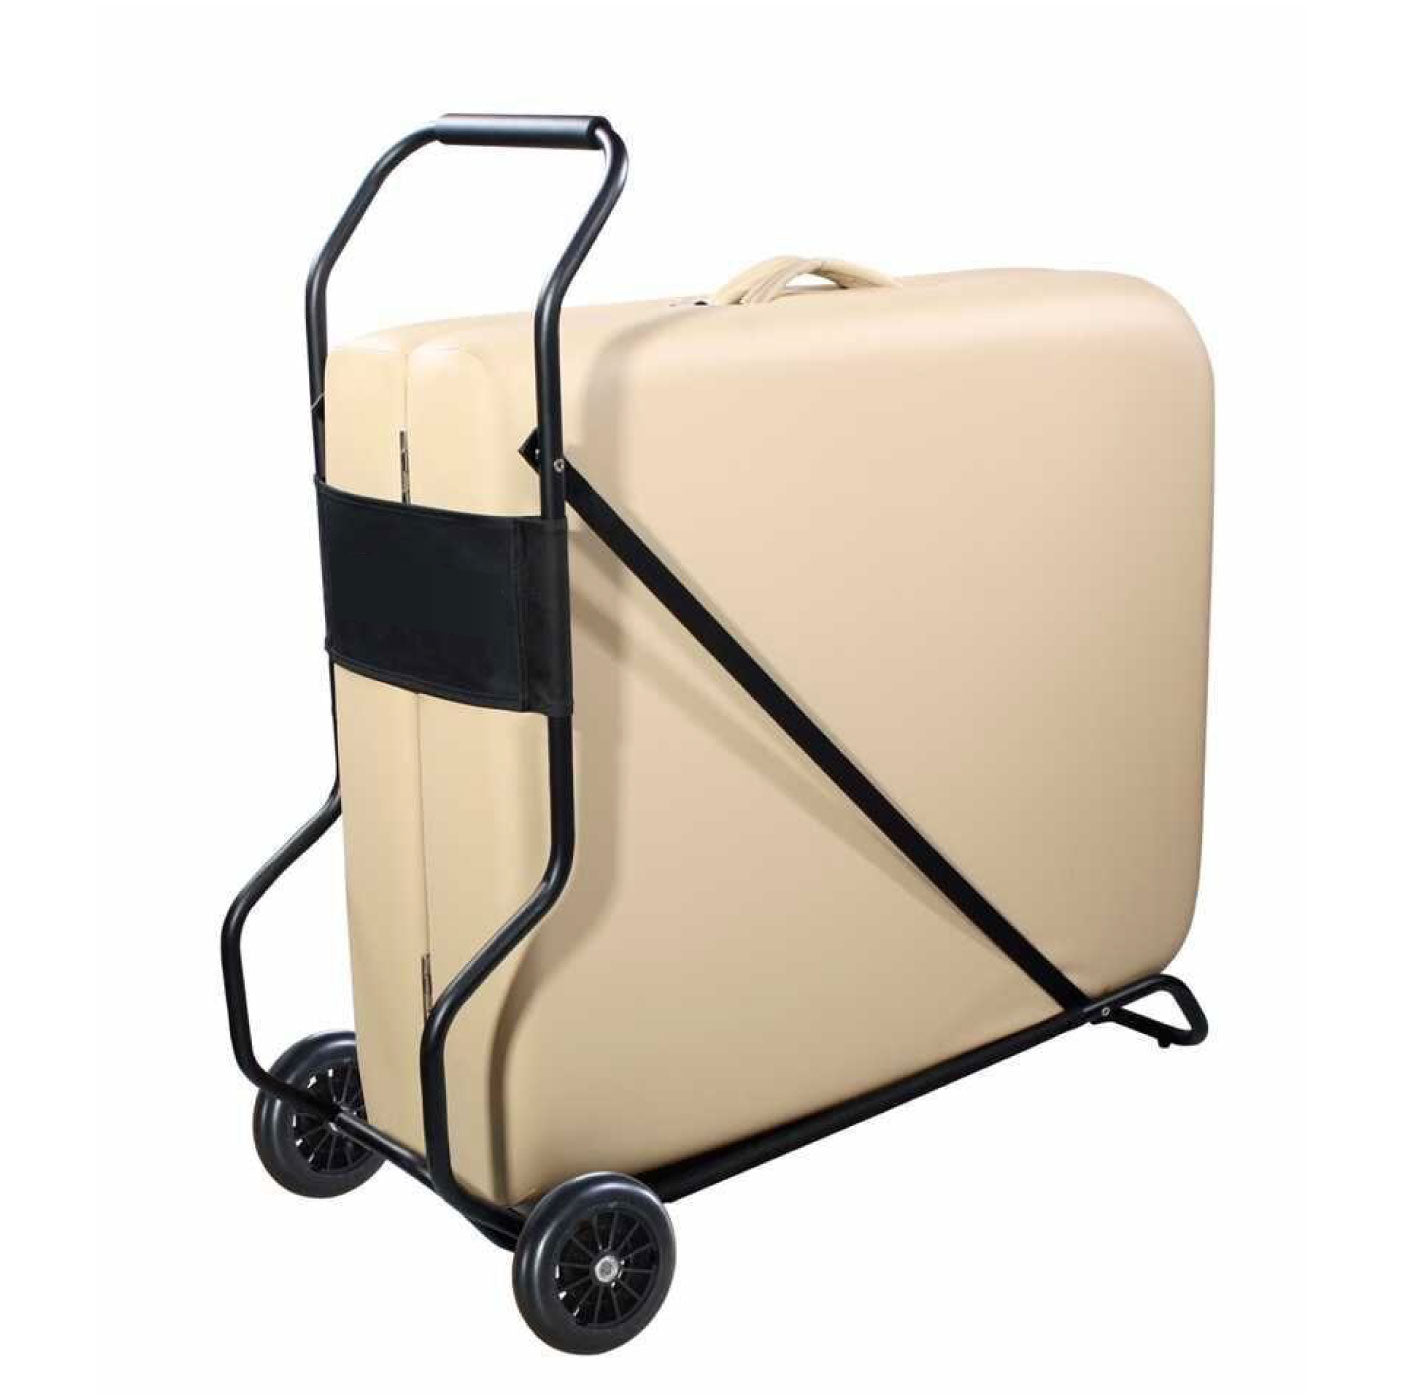 Universal Wheeled Table Cart - Save Your Back & Shoulders with This EASY Table Cart!